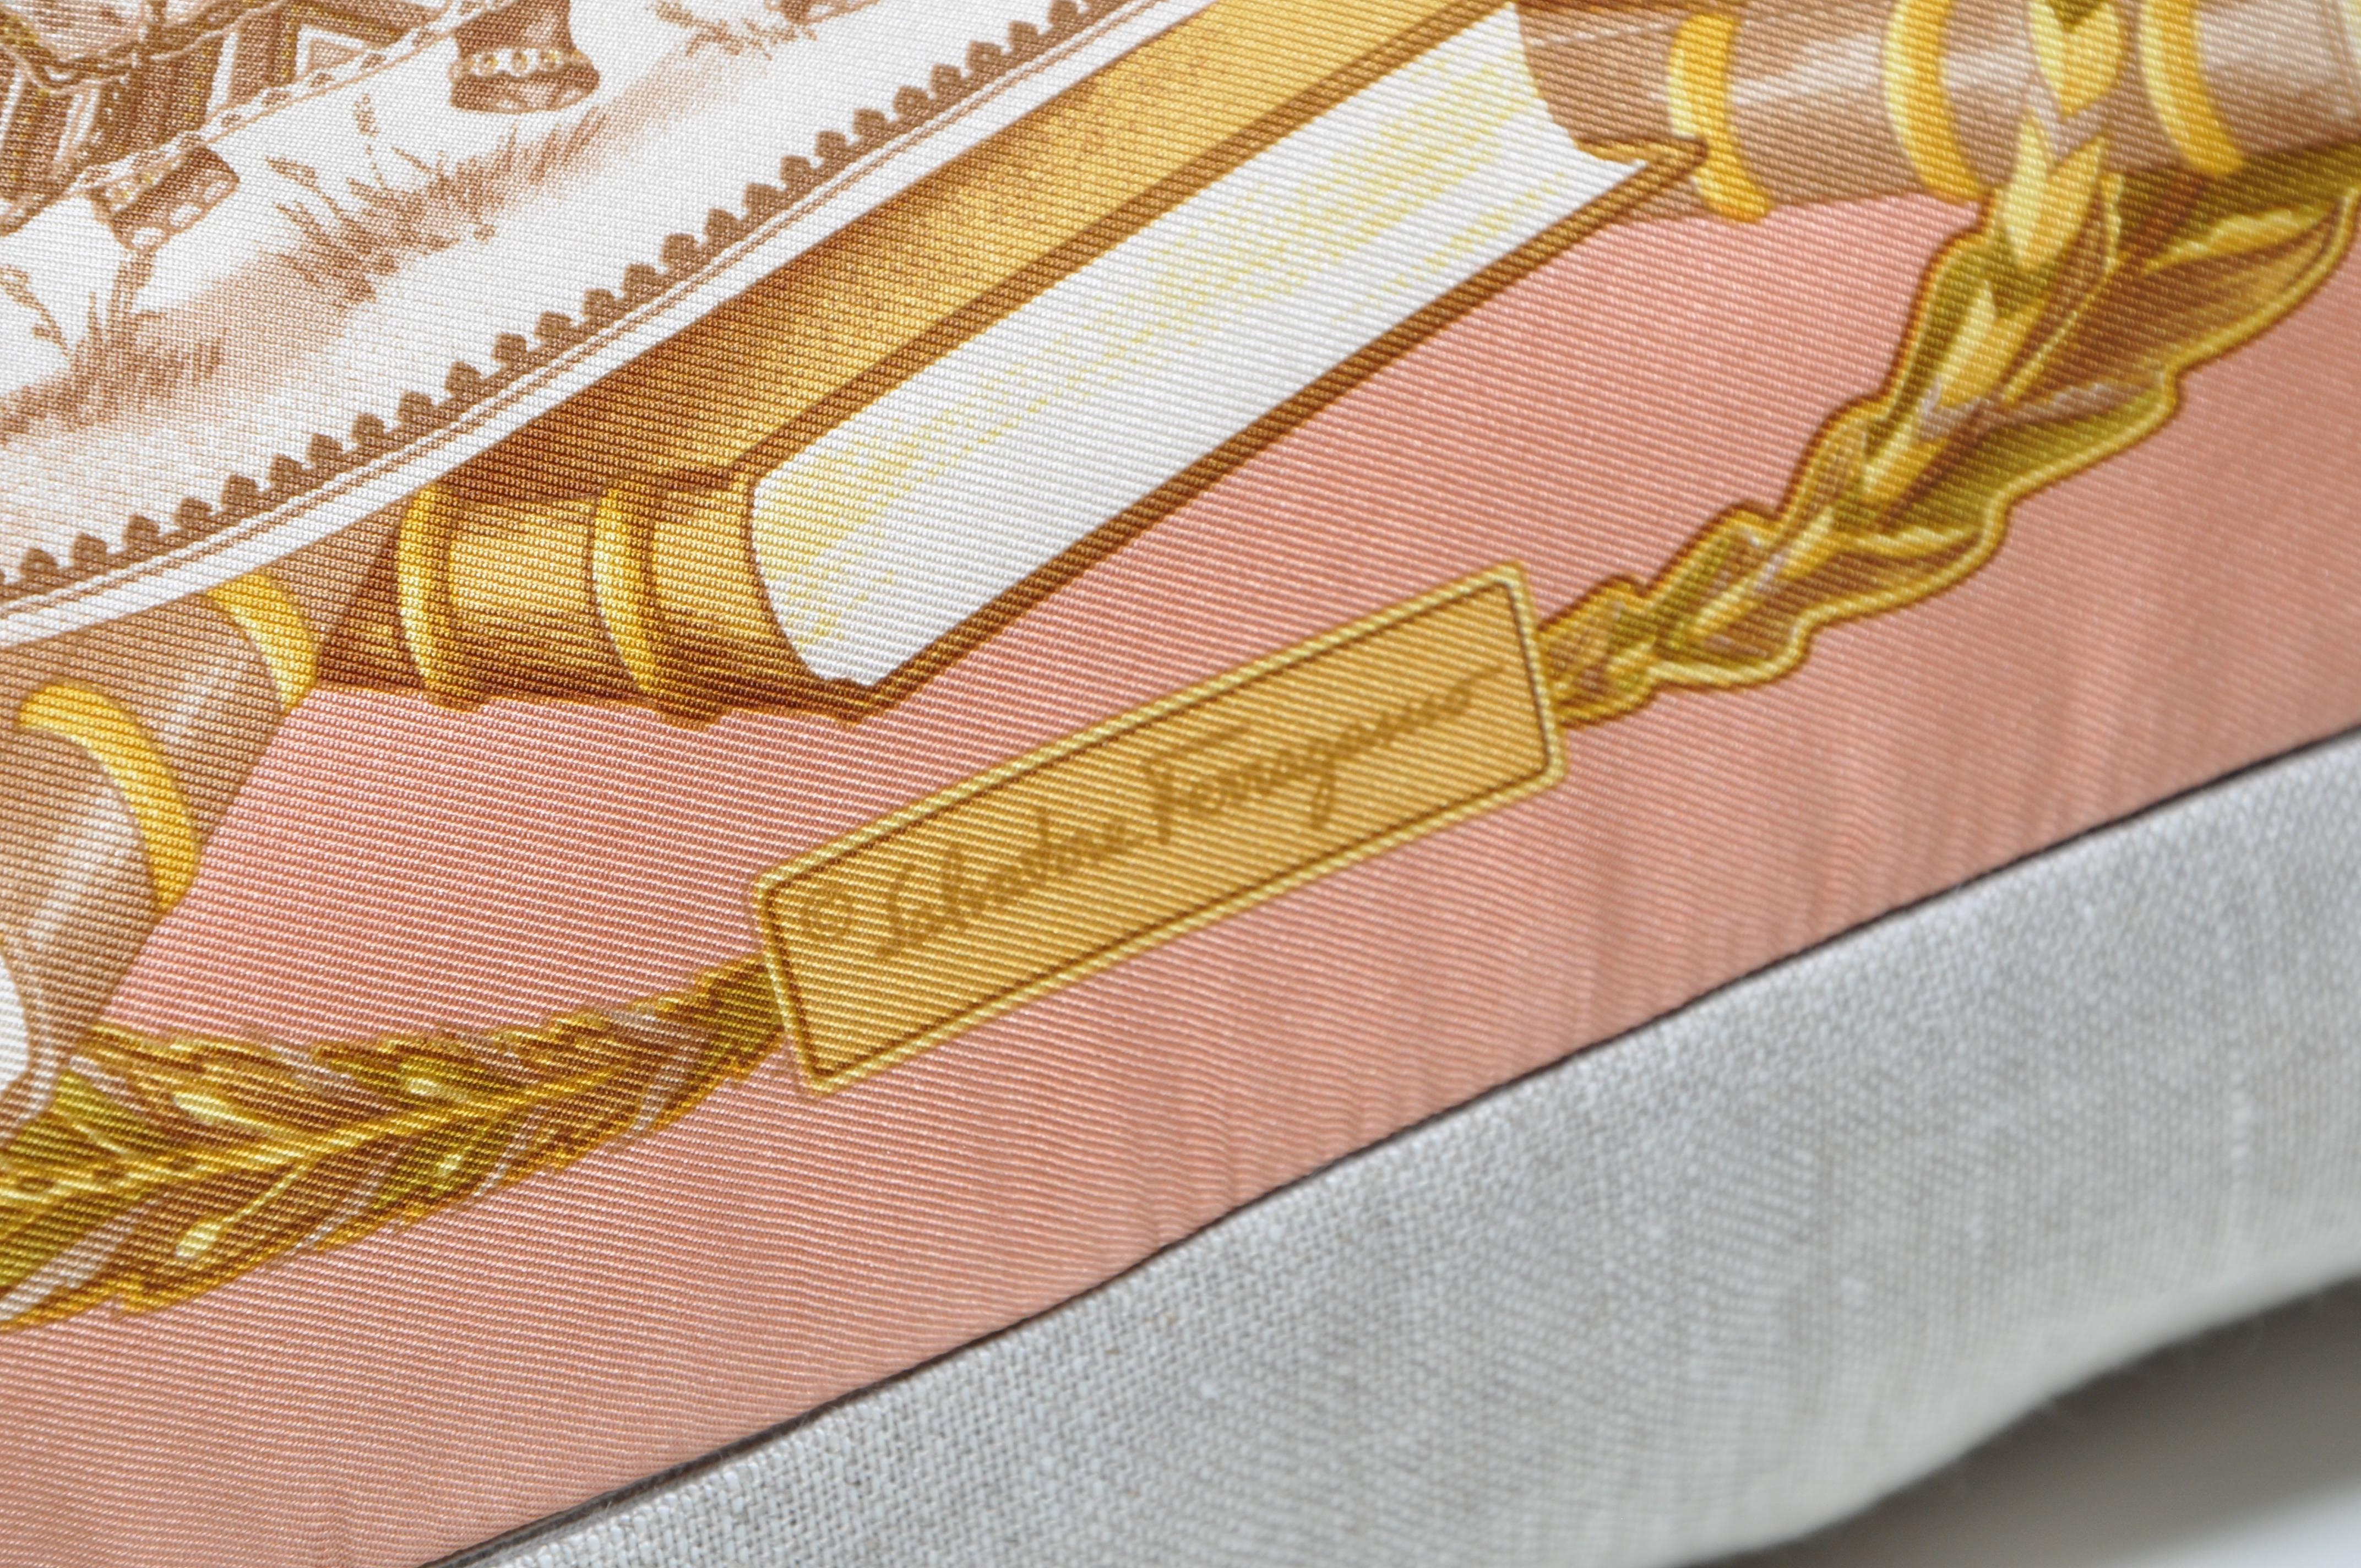 Custom-made one-of-a kind luxury cushion (pillow) created from a stunning vintage silk Salvatore Ferragamo fashion scarf in an elaborate and elegant design.

Salvatore Ferragamo was an innovative shoe designer from Milan renowned for his iconic